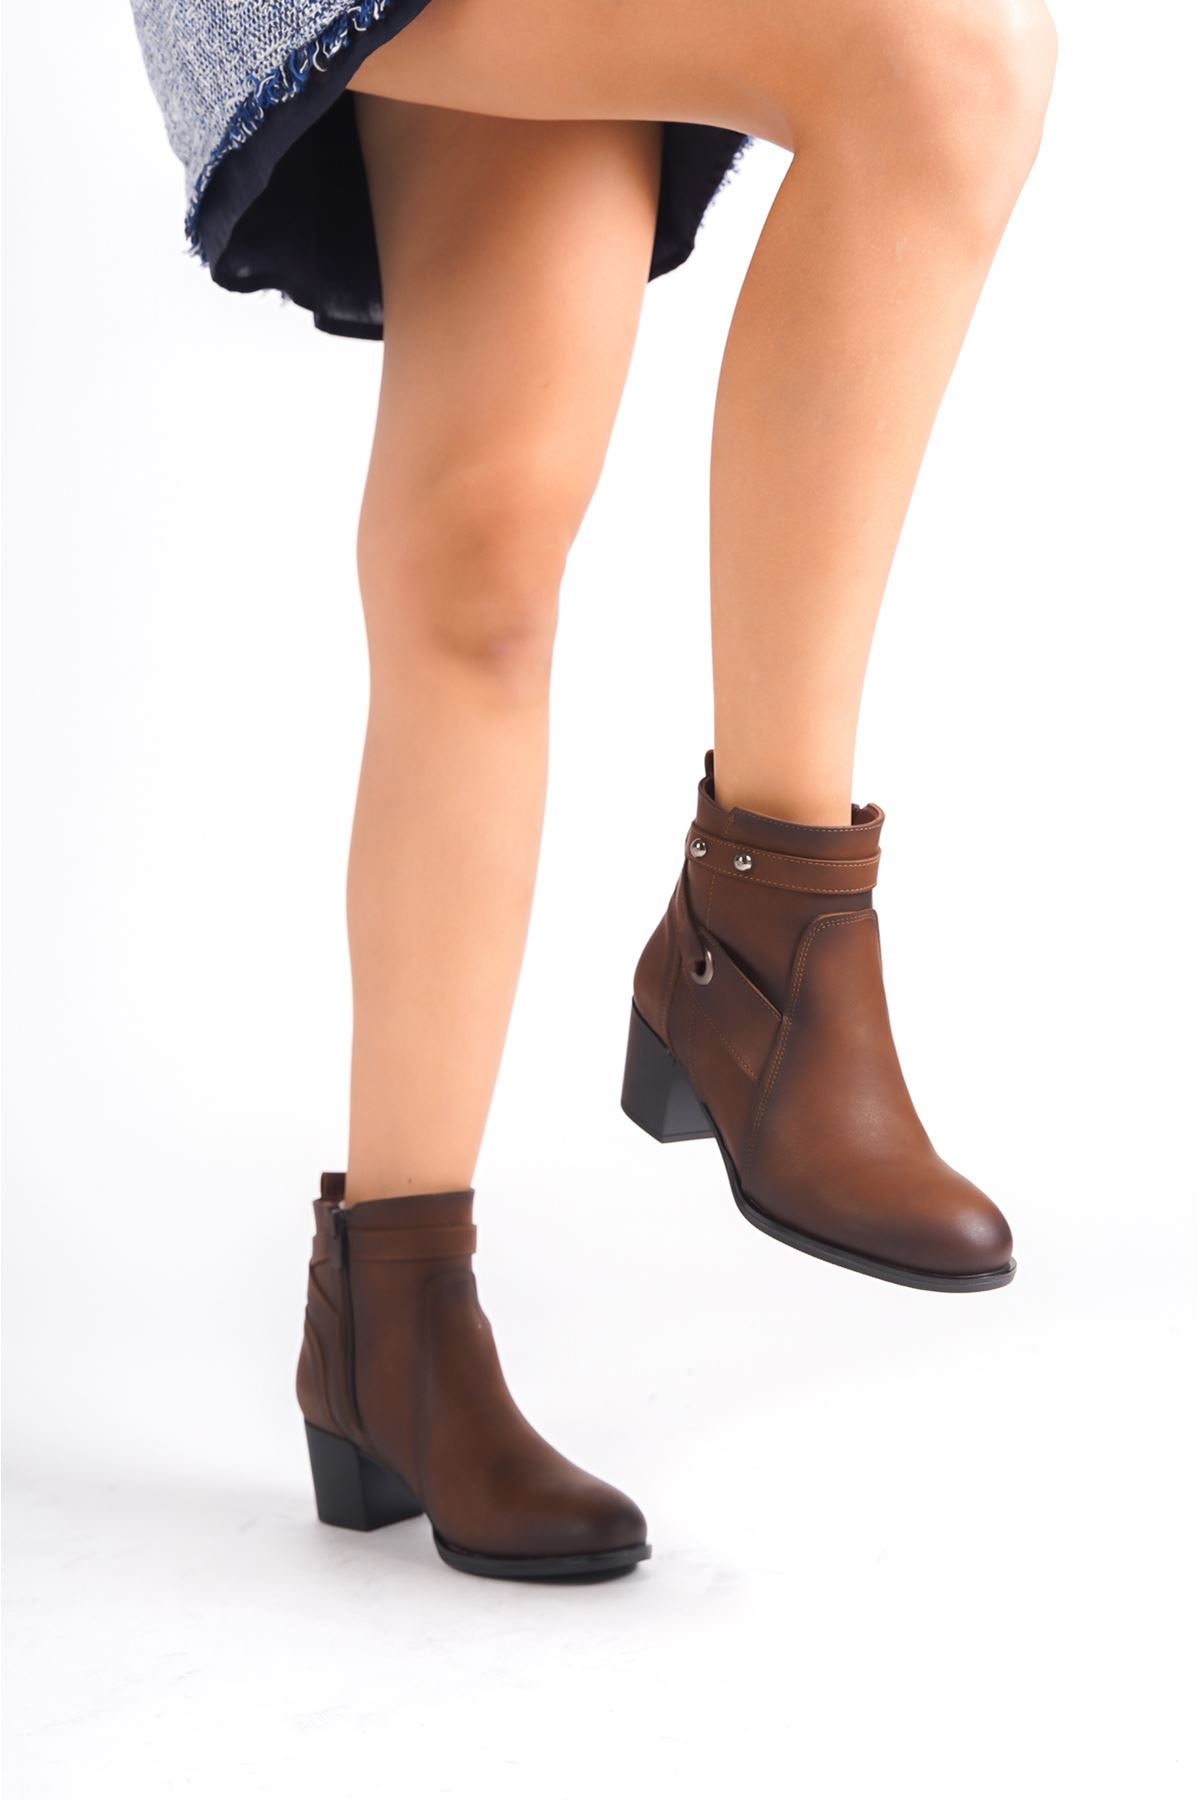 Weng Brown Women's Heeled Boots - STREETMODE ™